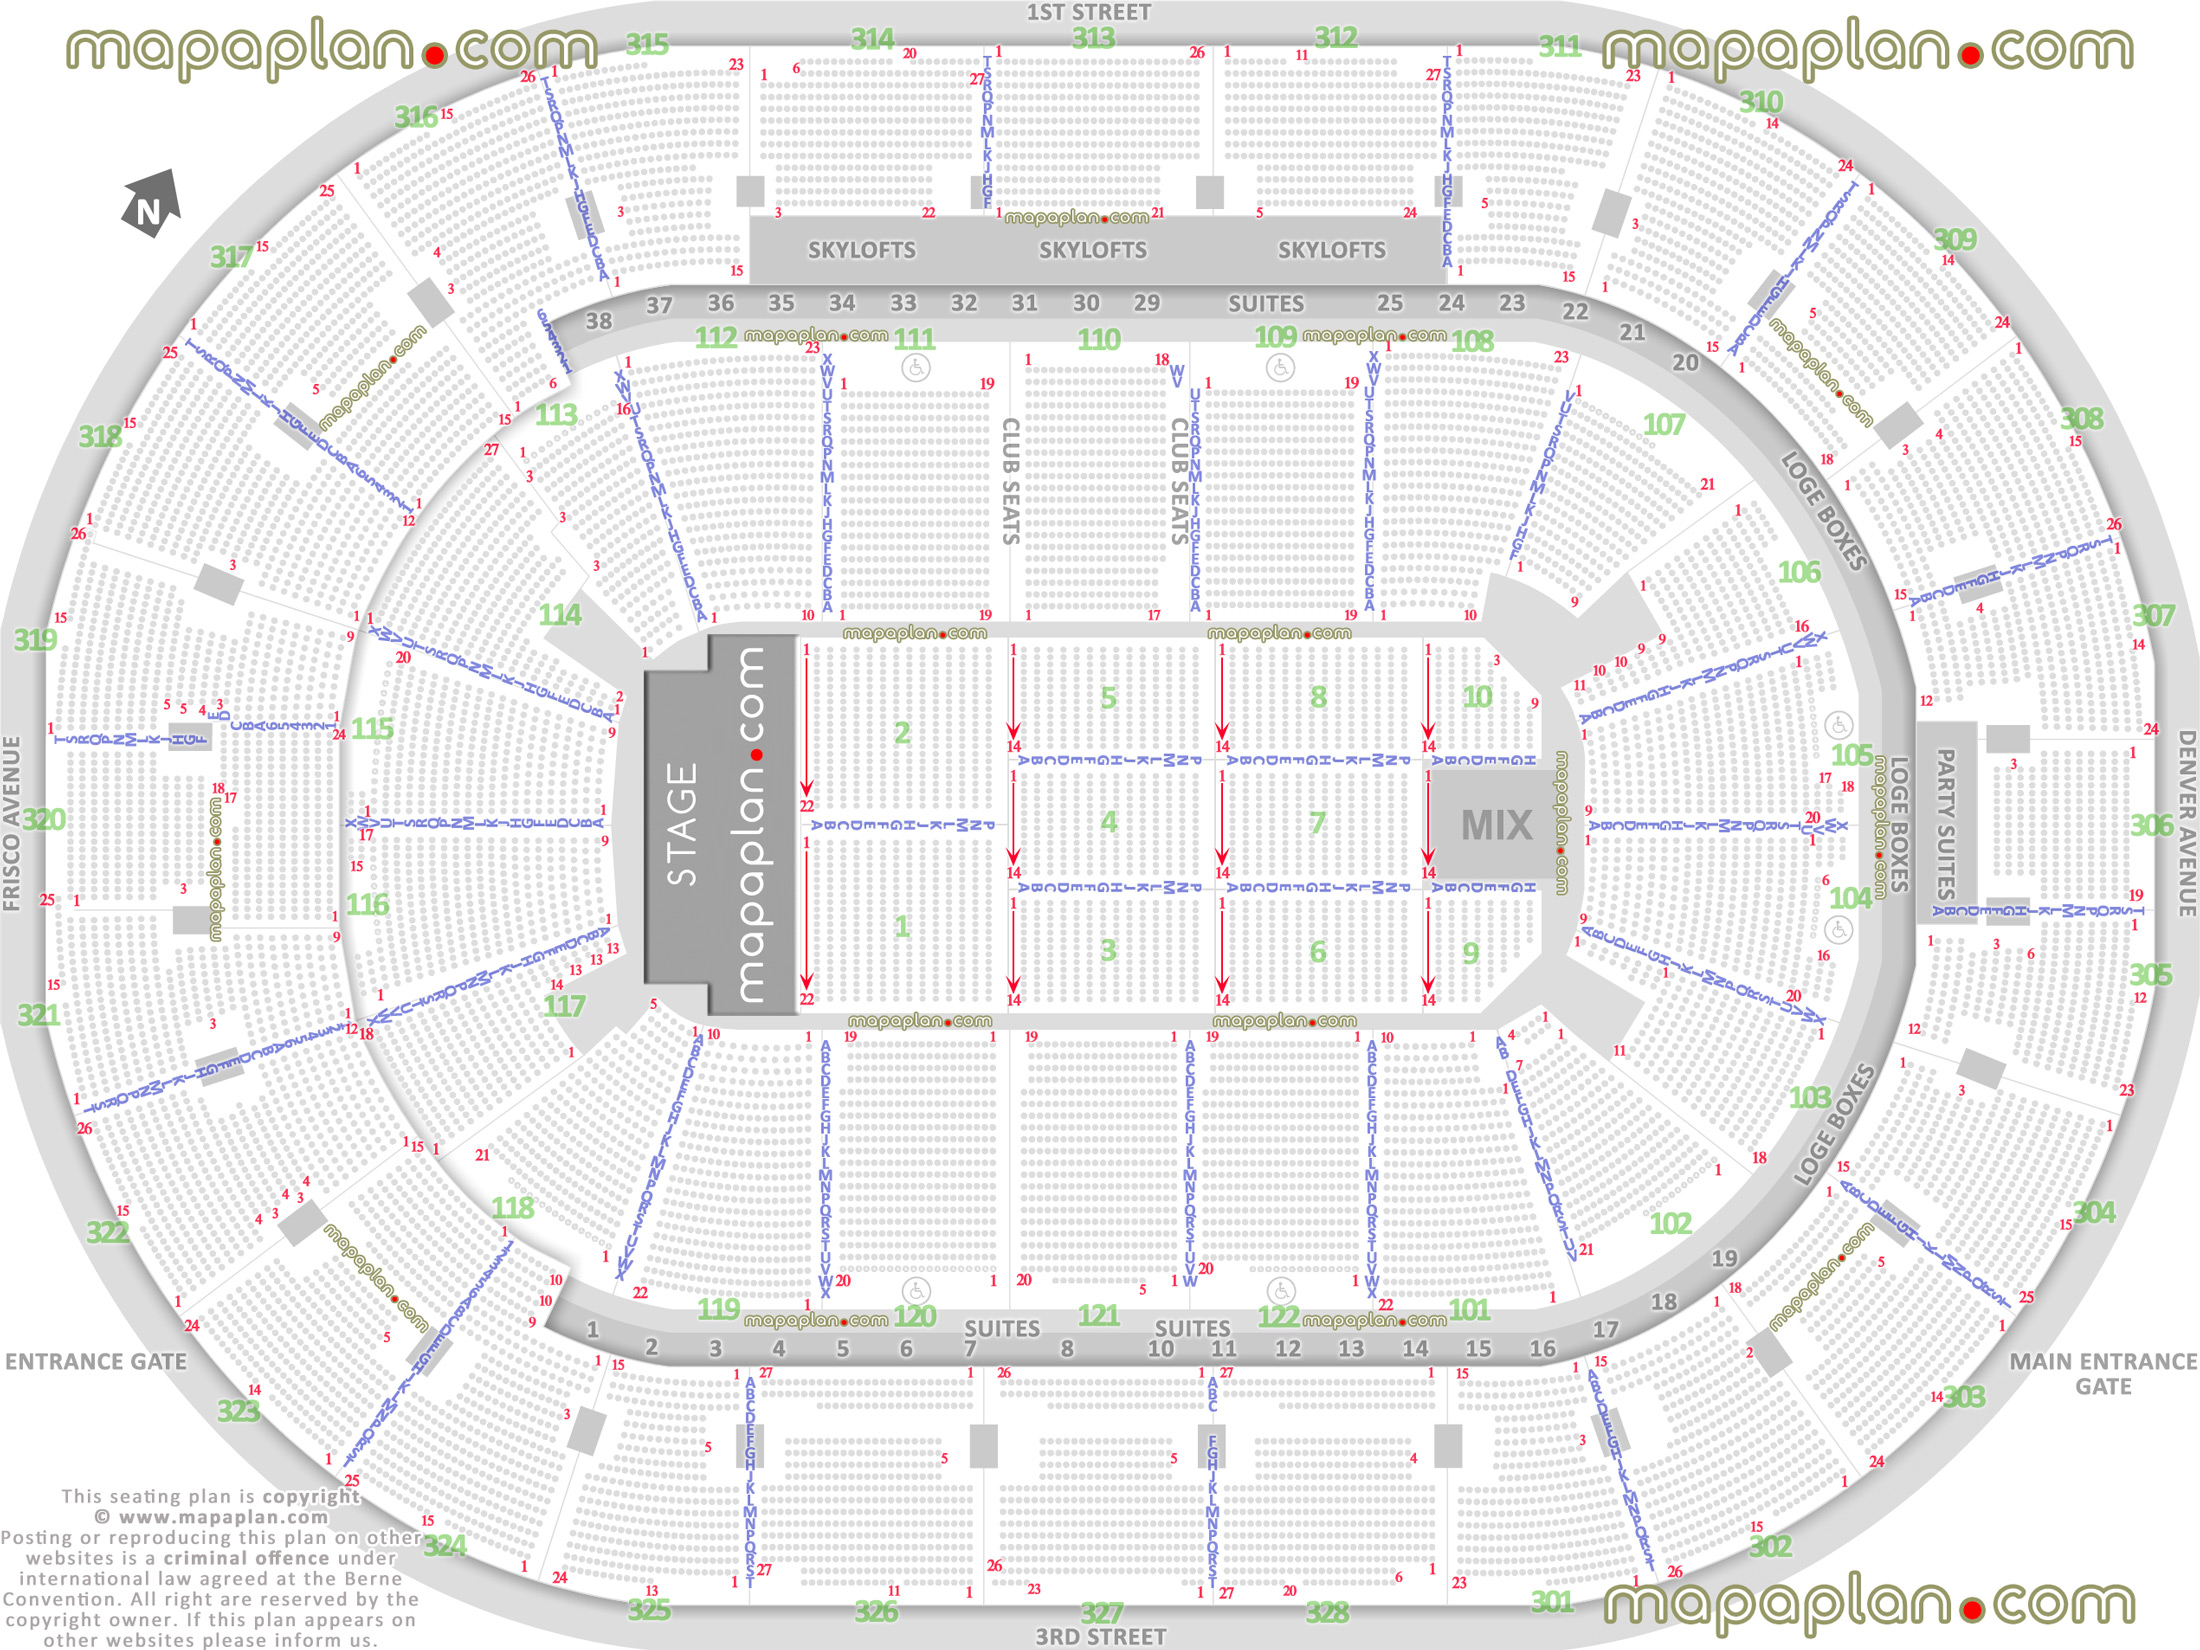 detailed seat row numbers end stage concert sections floor plan map arena lower upper level layout Tulsa BOK Center seating chart